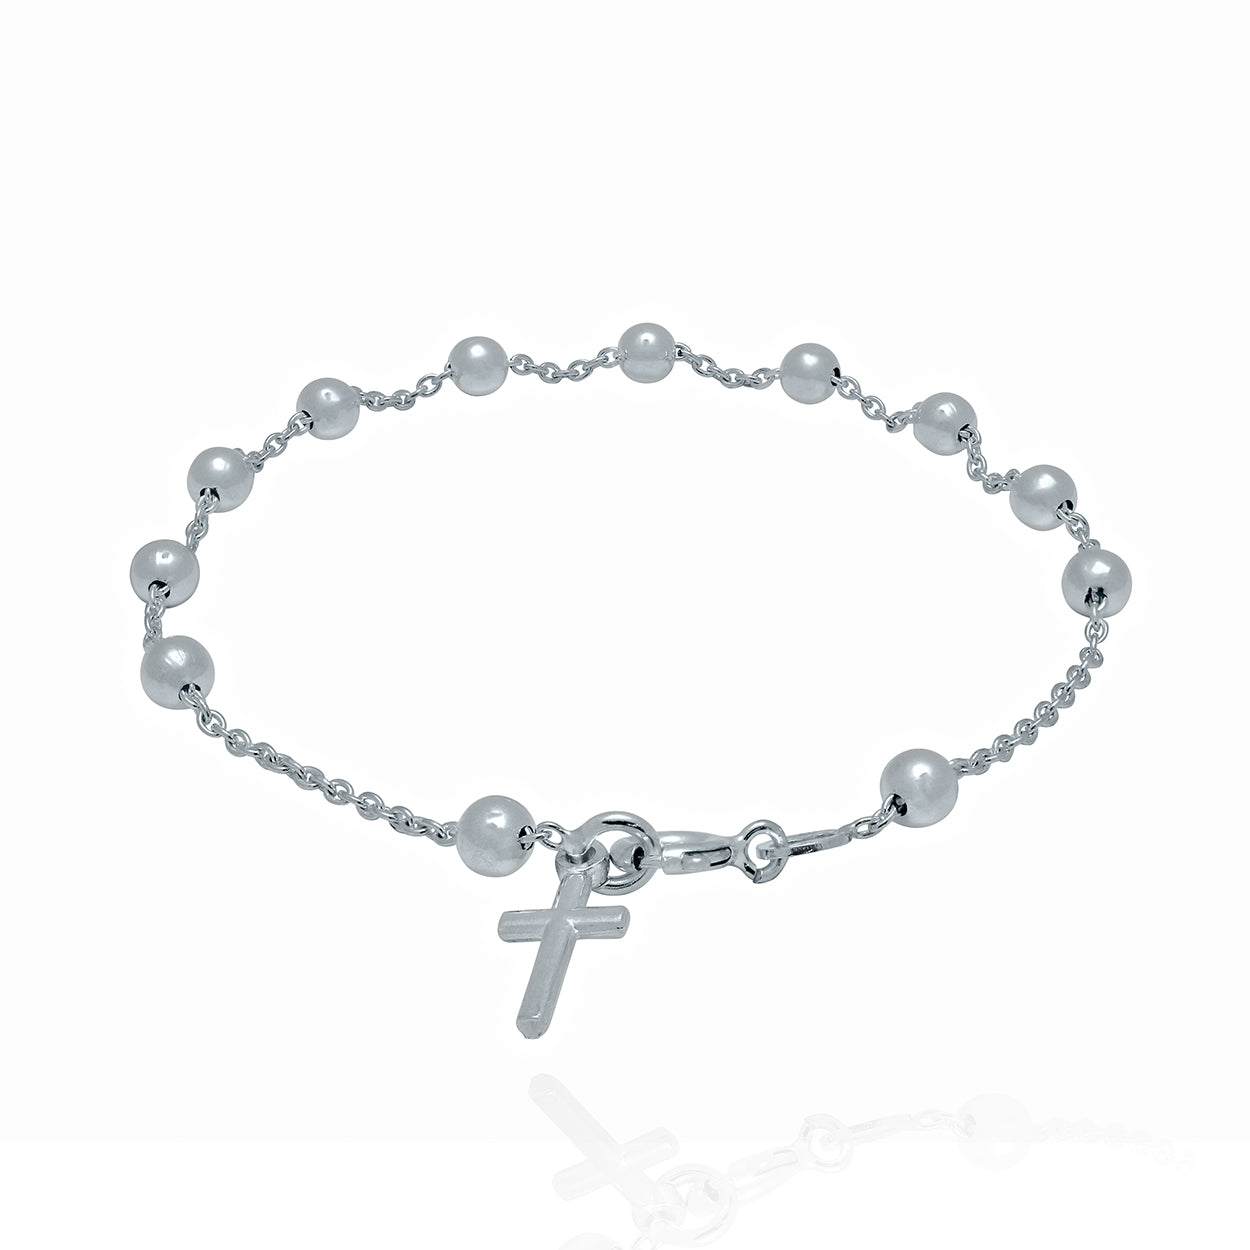 6mm Crystal- Austrian Crystal Rosary Bracelet – Tuscan Hills Religious Gifts